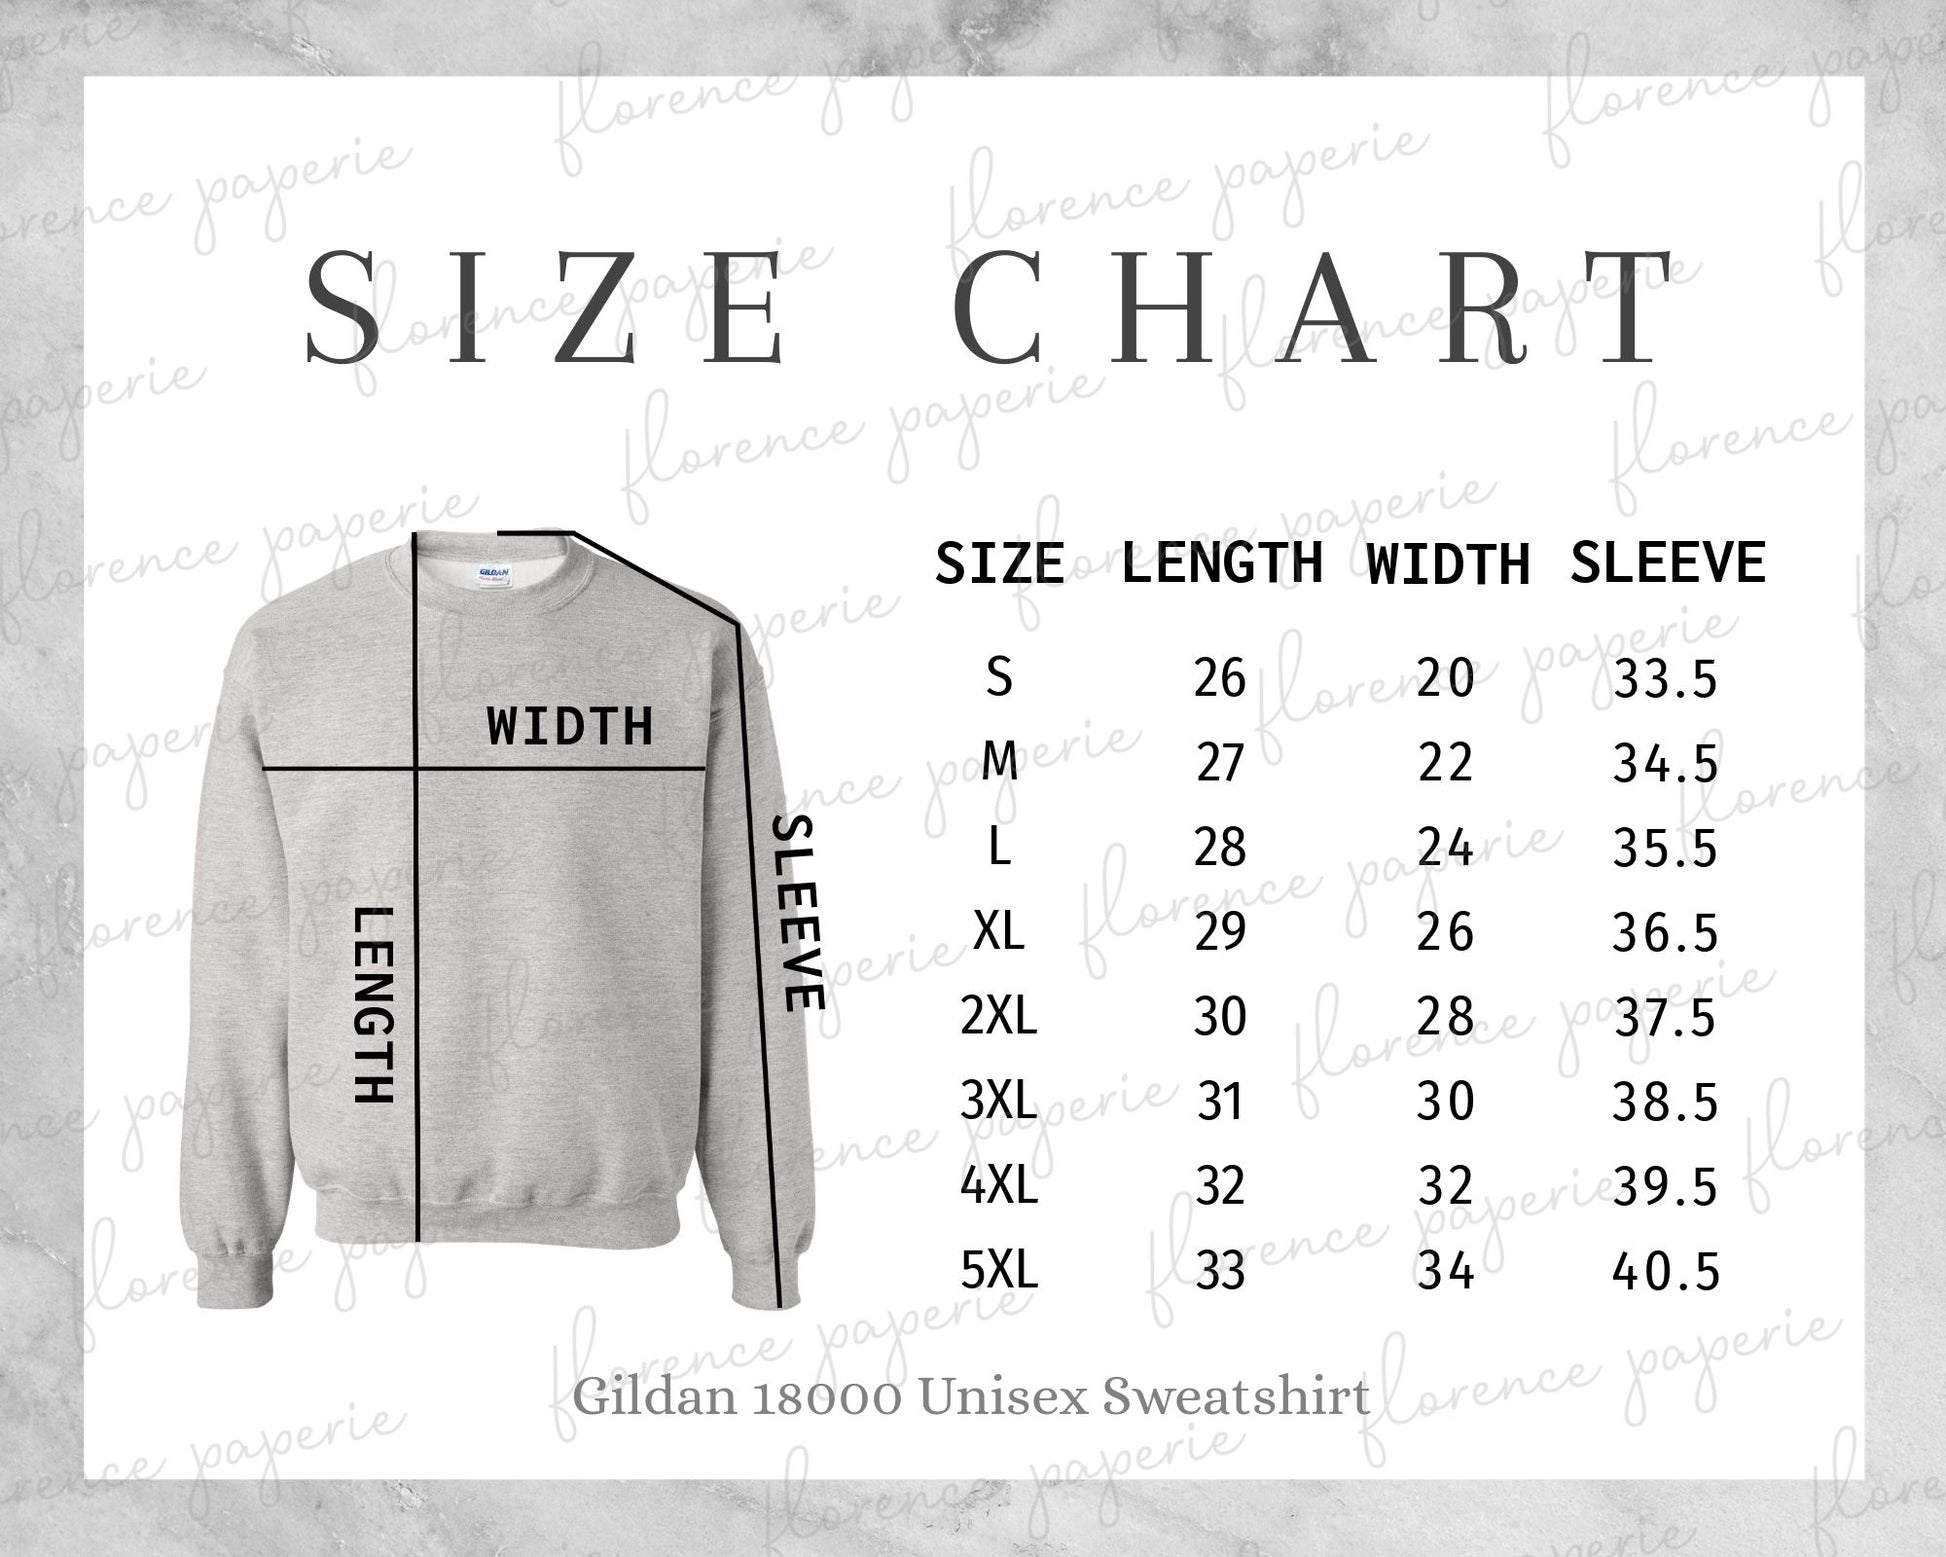 Size chart for this sweatshirt